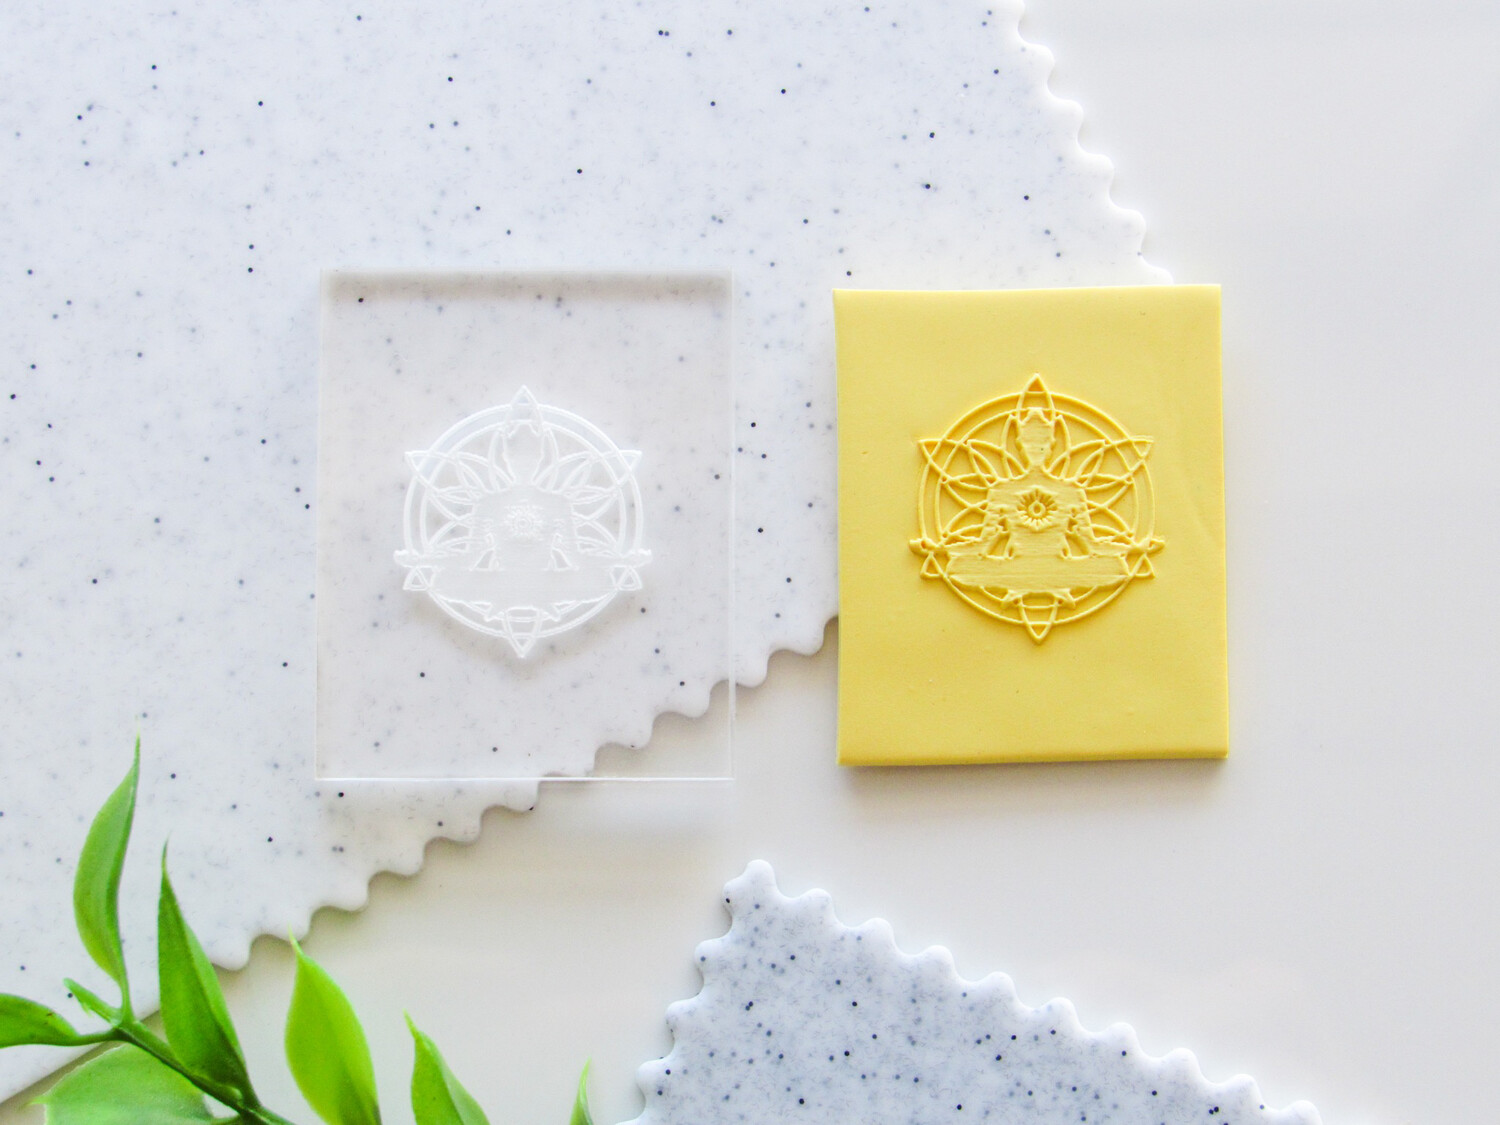 Mini Acrylic Embossing Stamp - 1.9" x 1.57" outer frame dimensions (=50mm x 40mm) Yoga